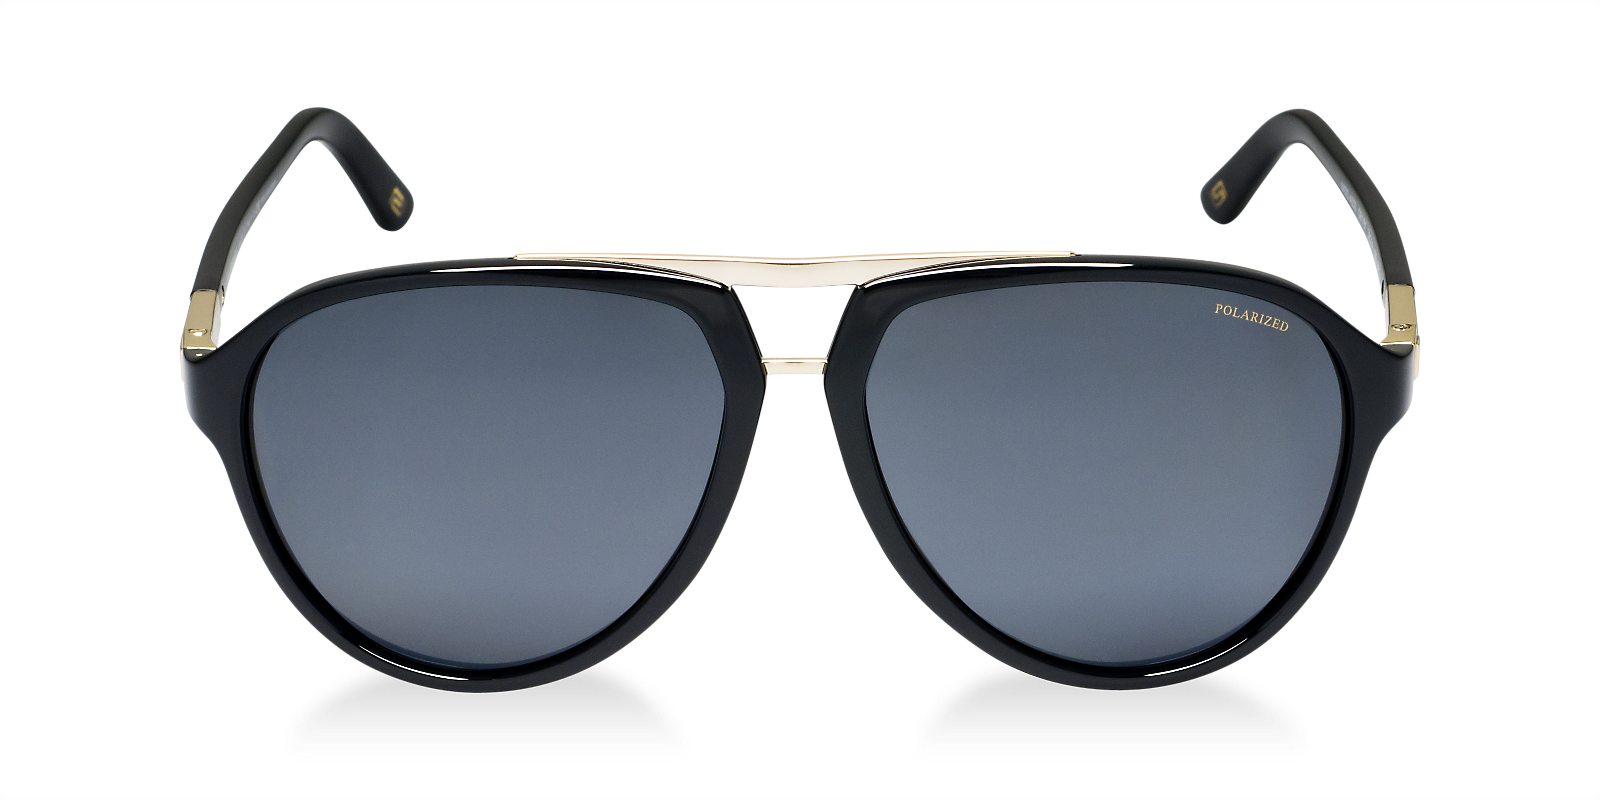 Download PNG image - Cool Sunglass PNG Image 